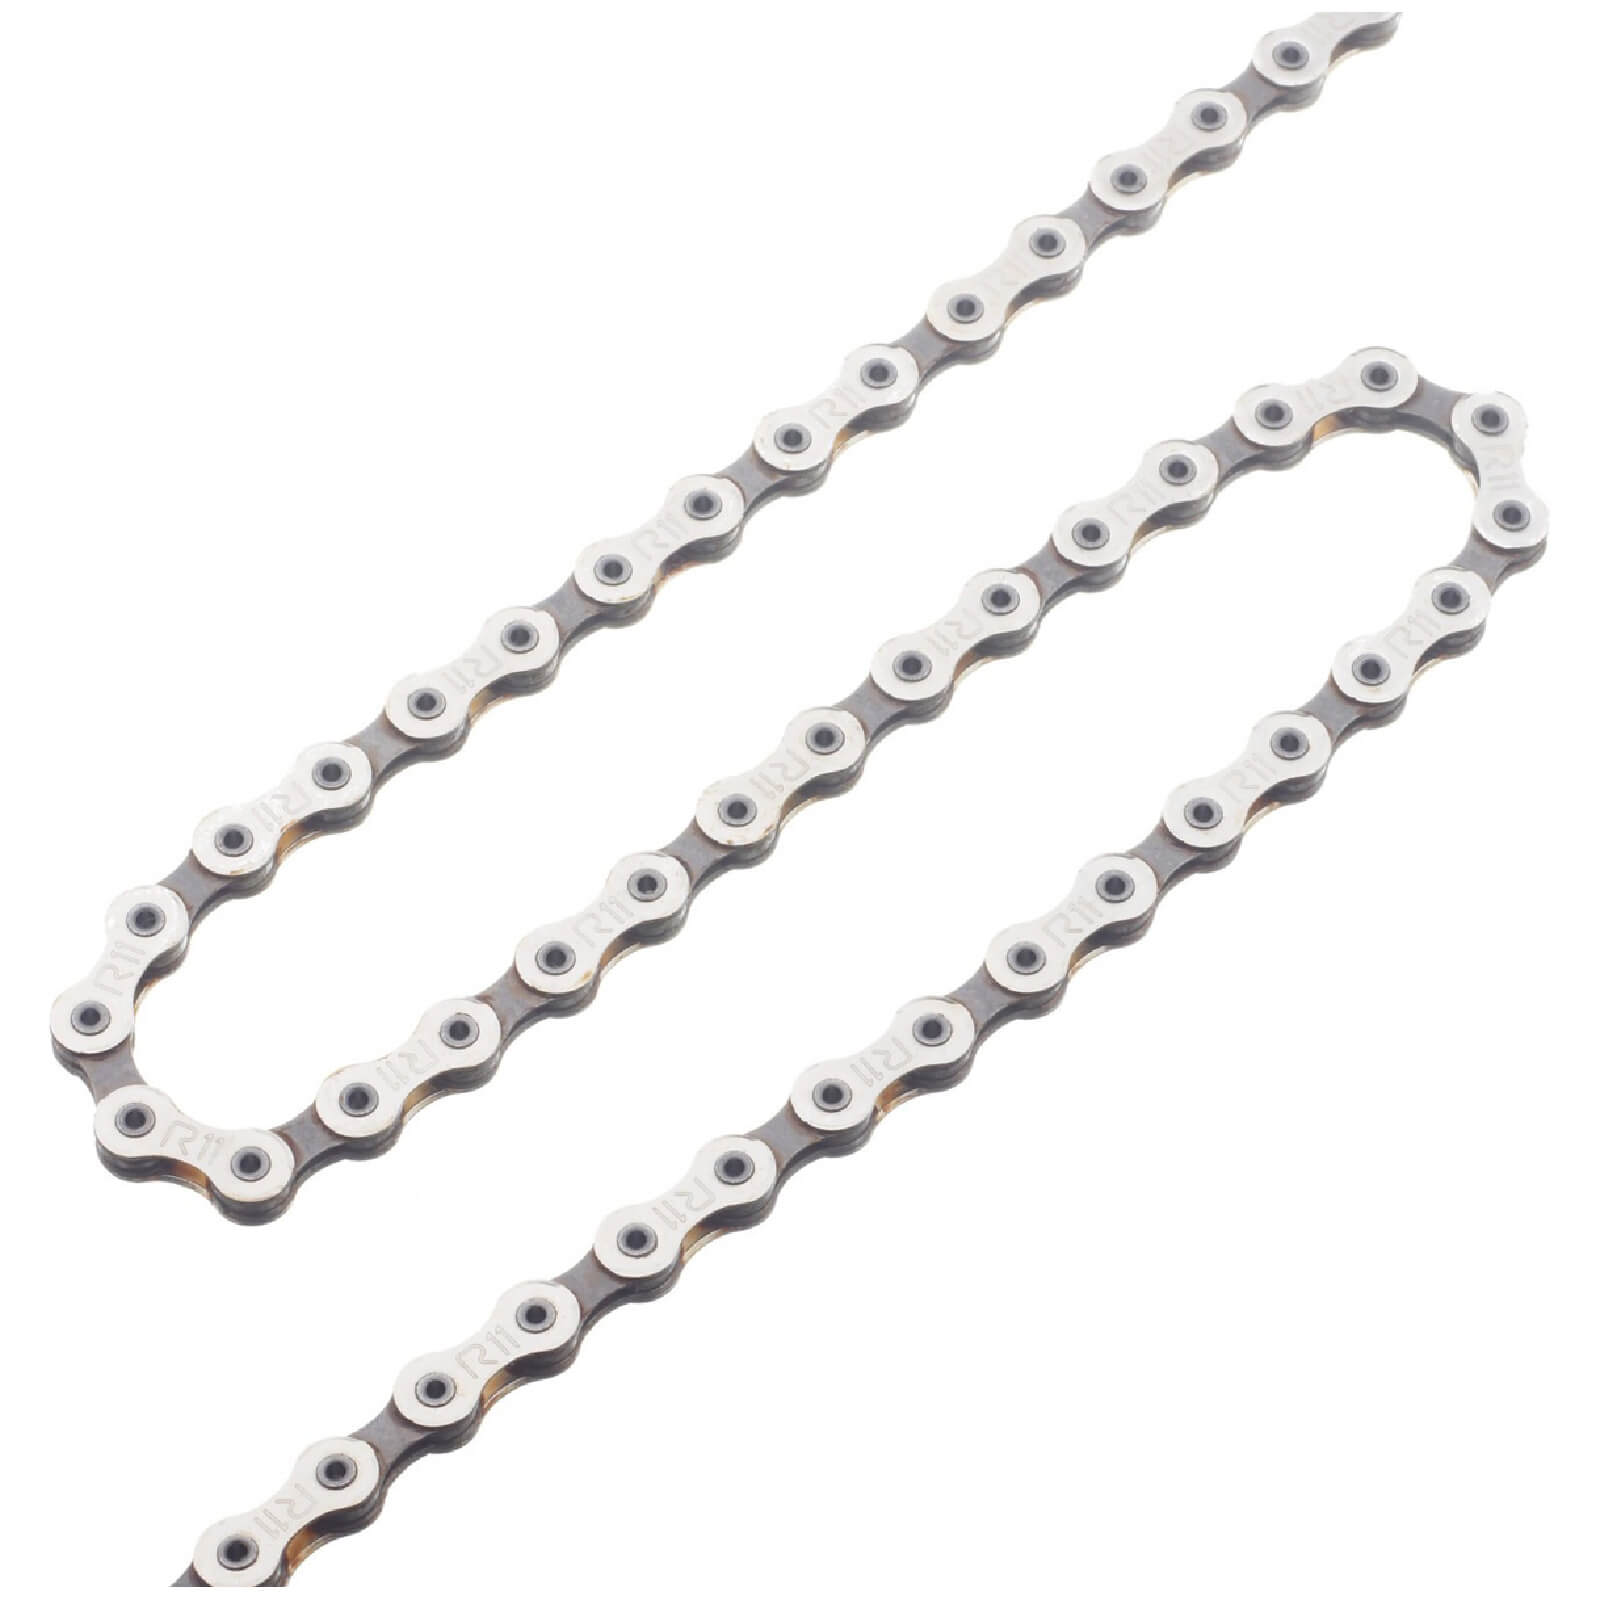 Campagnolo Potenza 11 Speed Chain - Silver - 114 Links